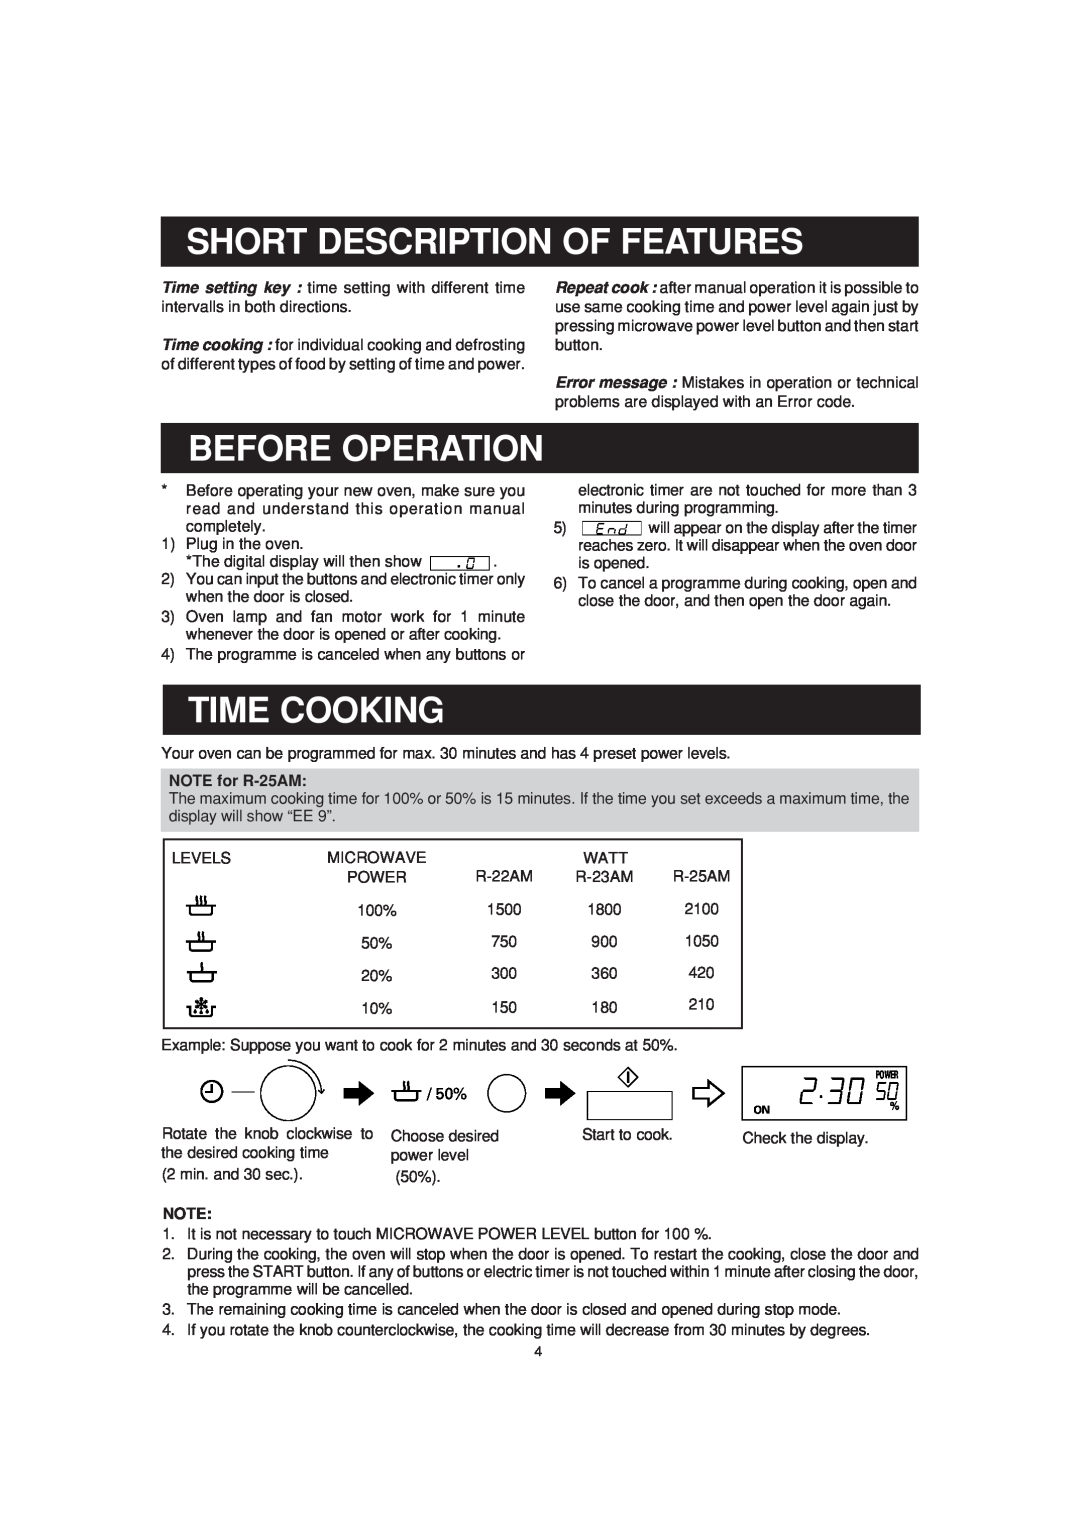 Sharp R-22AM, R-23AM operation manual Short Description Of Features, Before Operation, Time Cooking, NOTE for R-25AM 